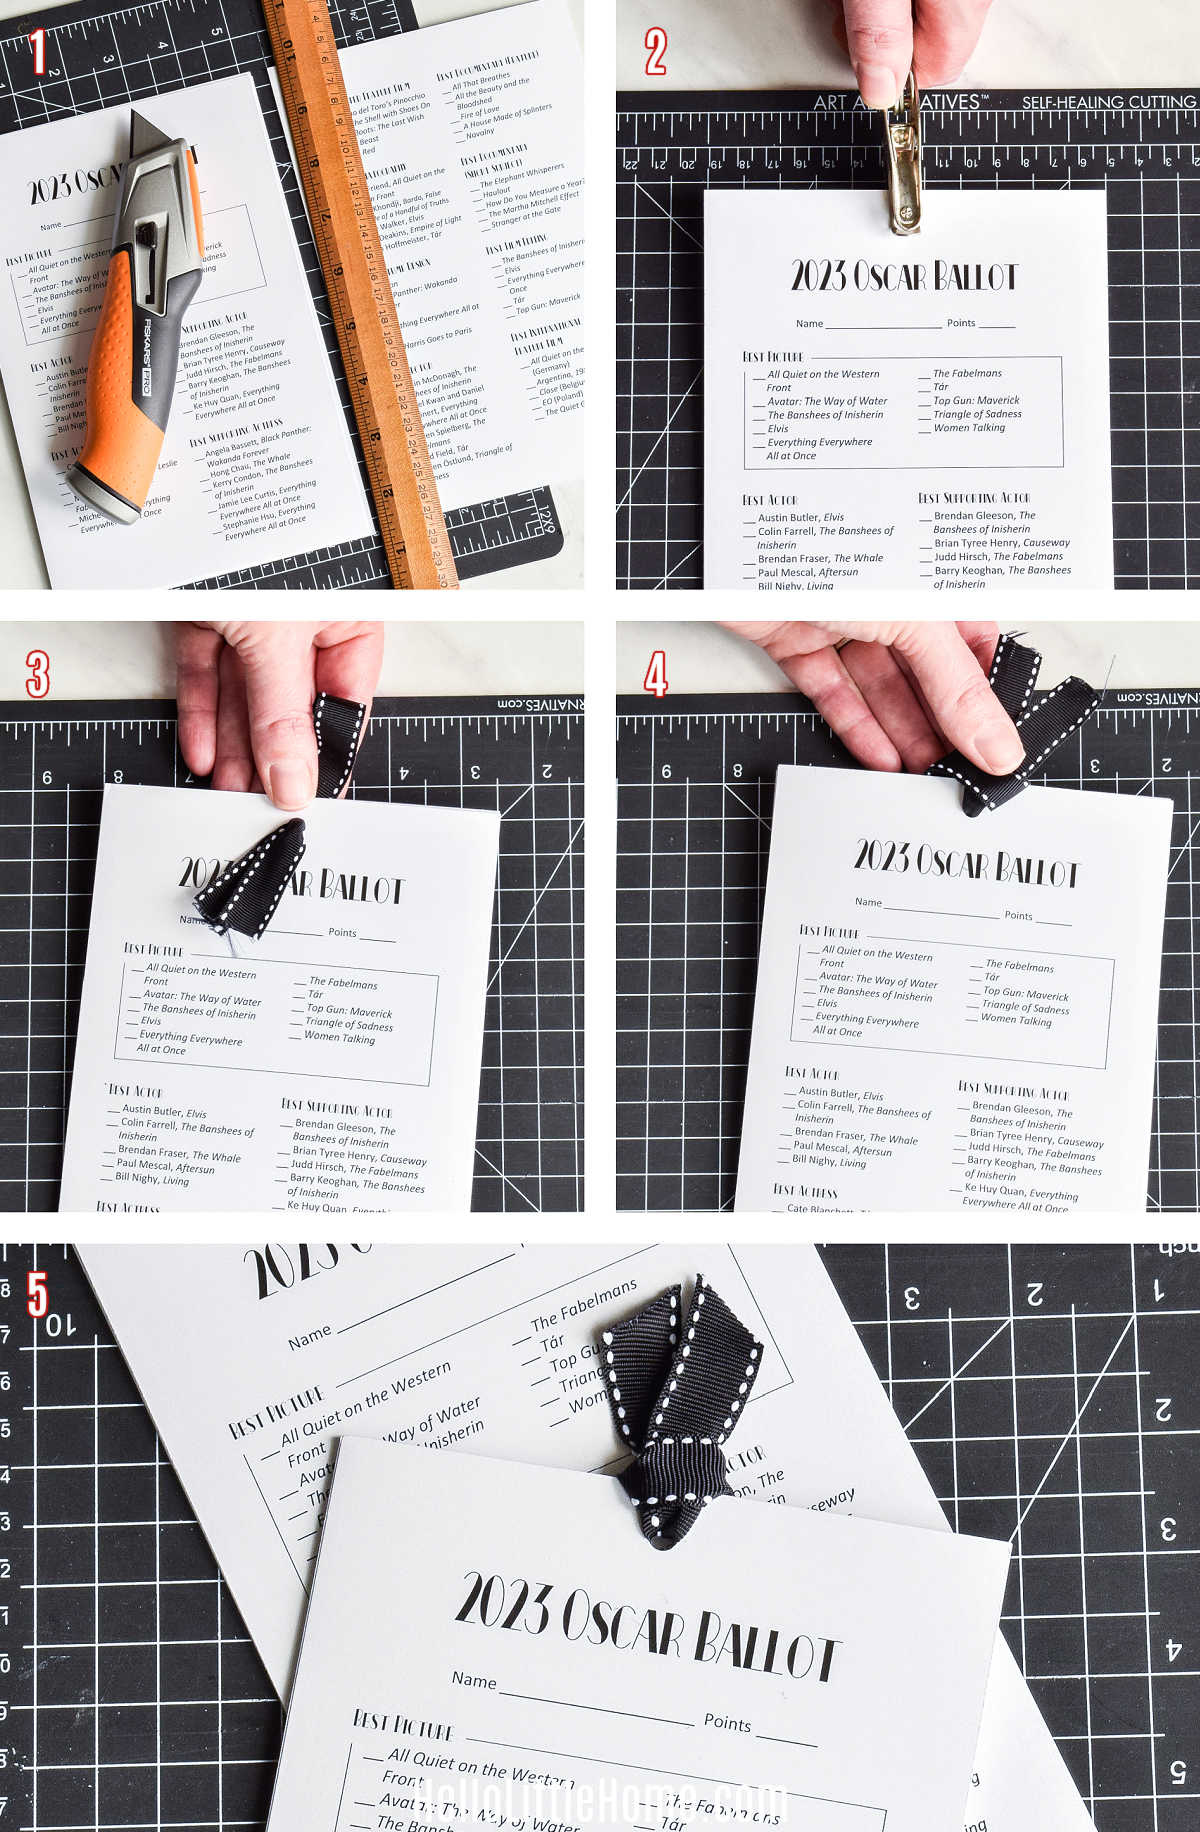 A collage of photos showing how to assemble an Oscar ballot template step by step.